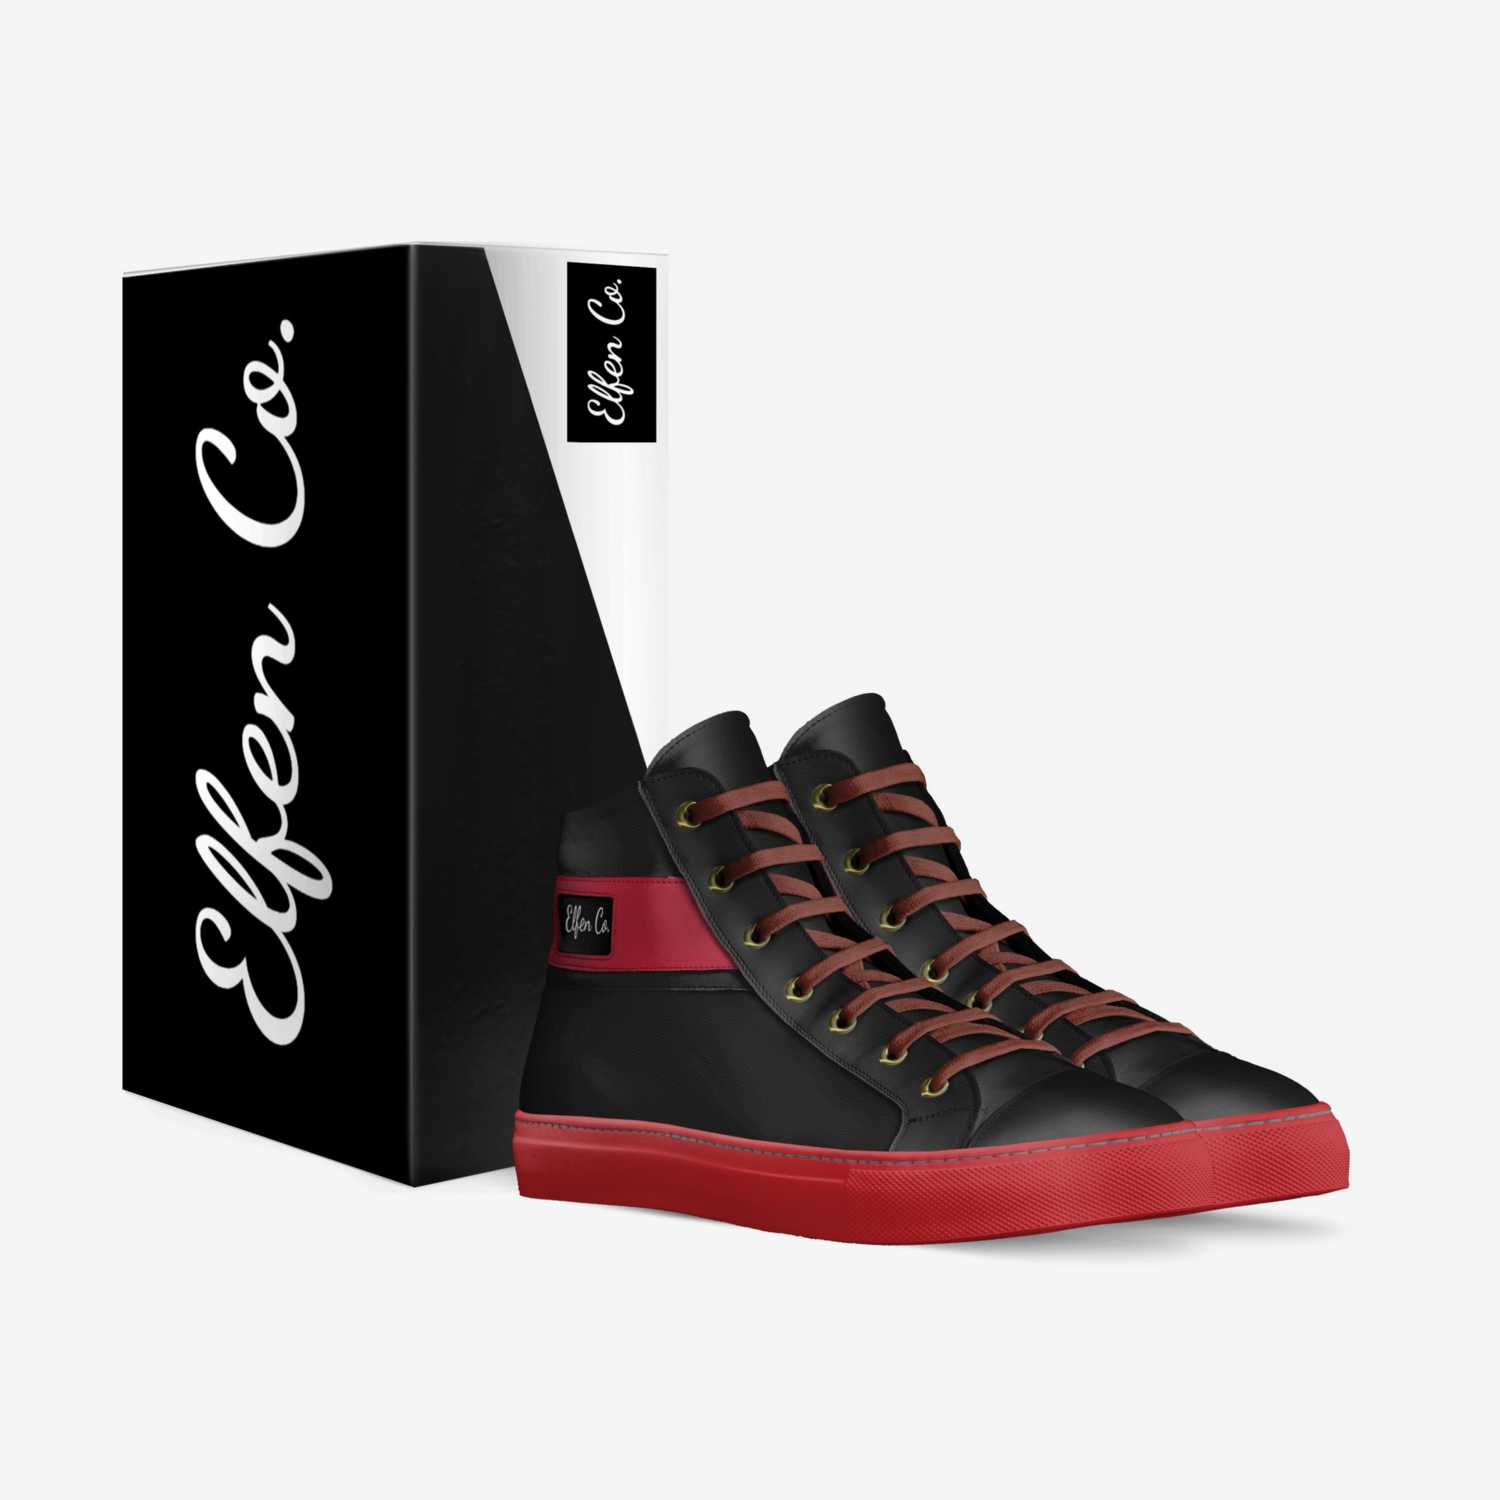 Elfen Brand custom made in Italy shoes by Zach Elfen | Box view